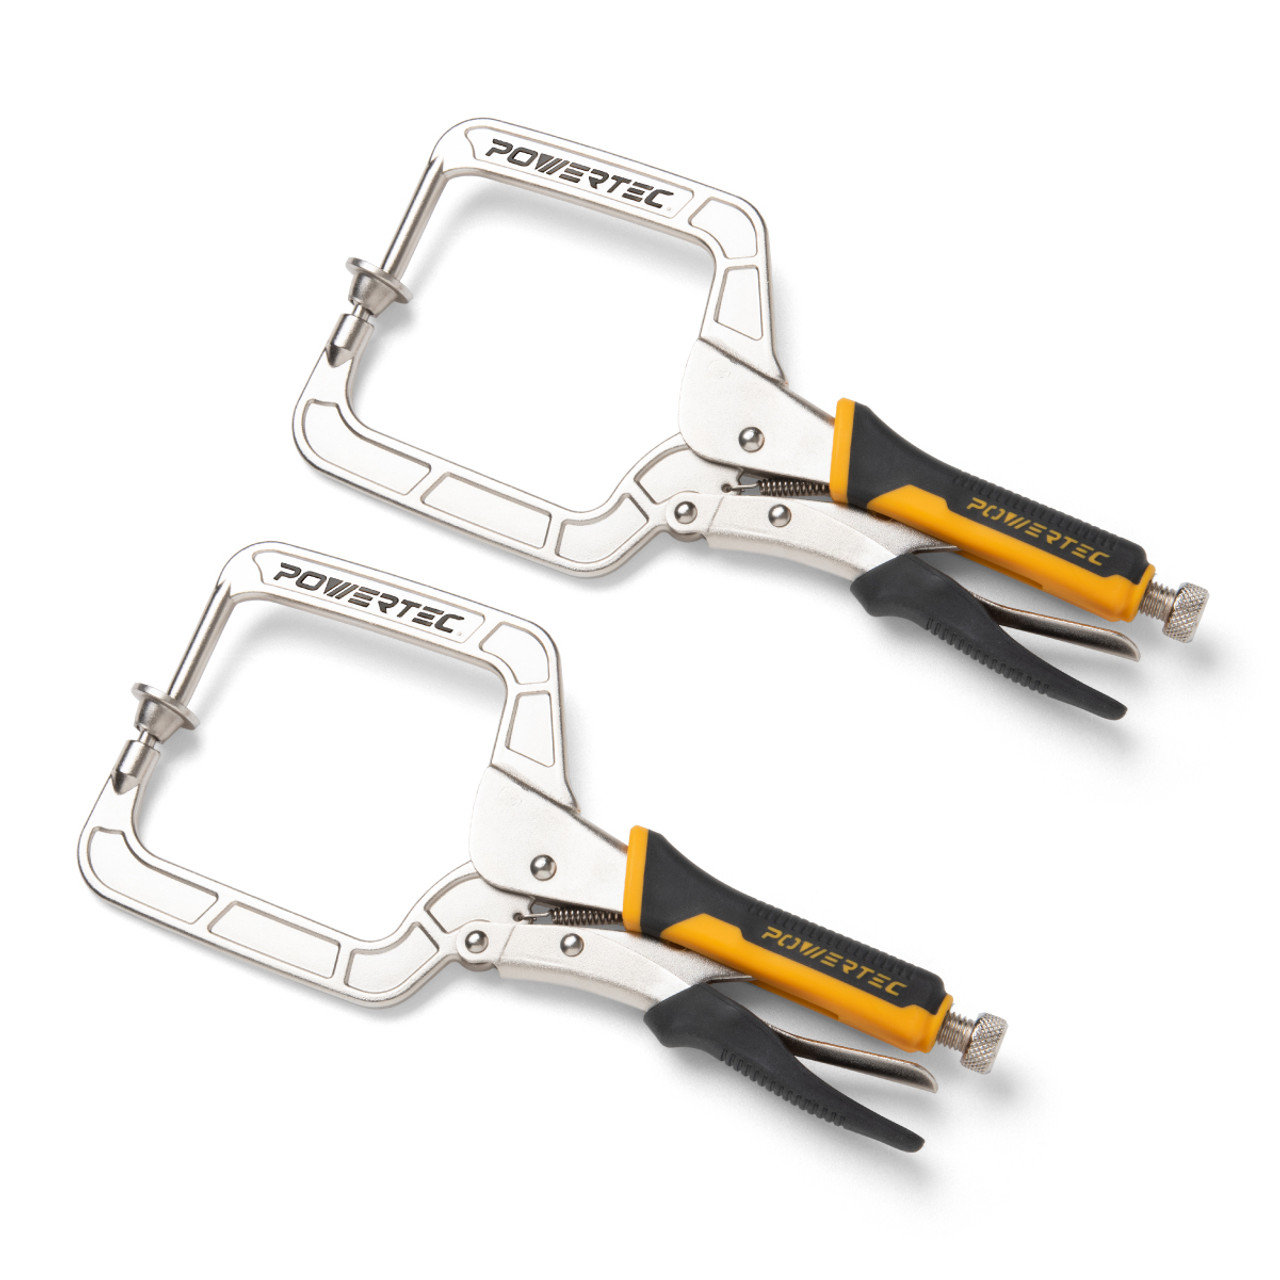 71744 12 Quick-Release Right Angle Clamp Set - POWERTEC